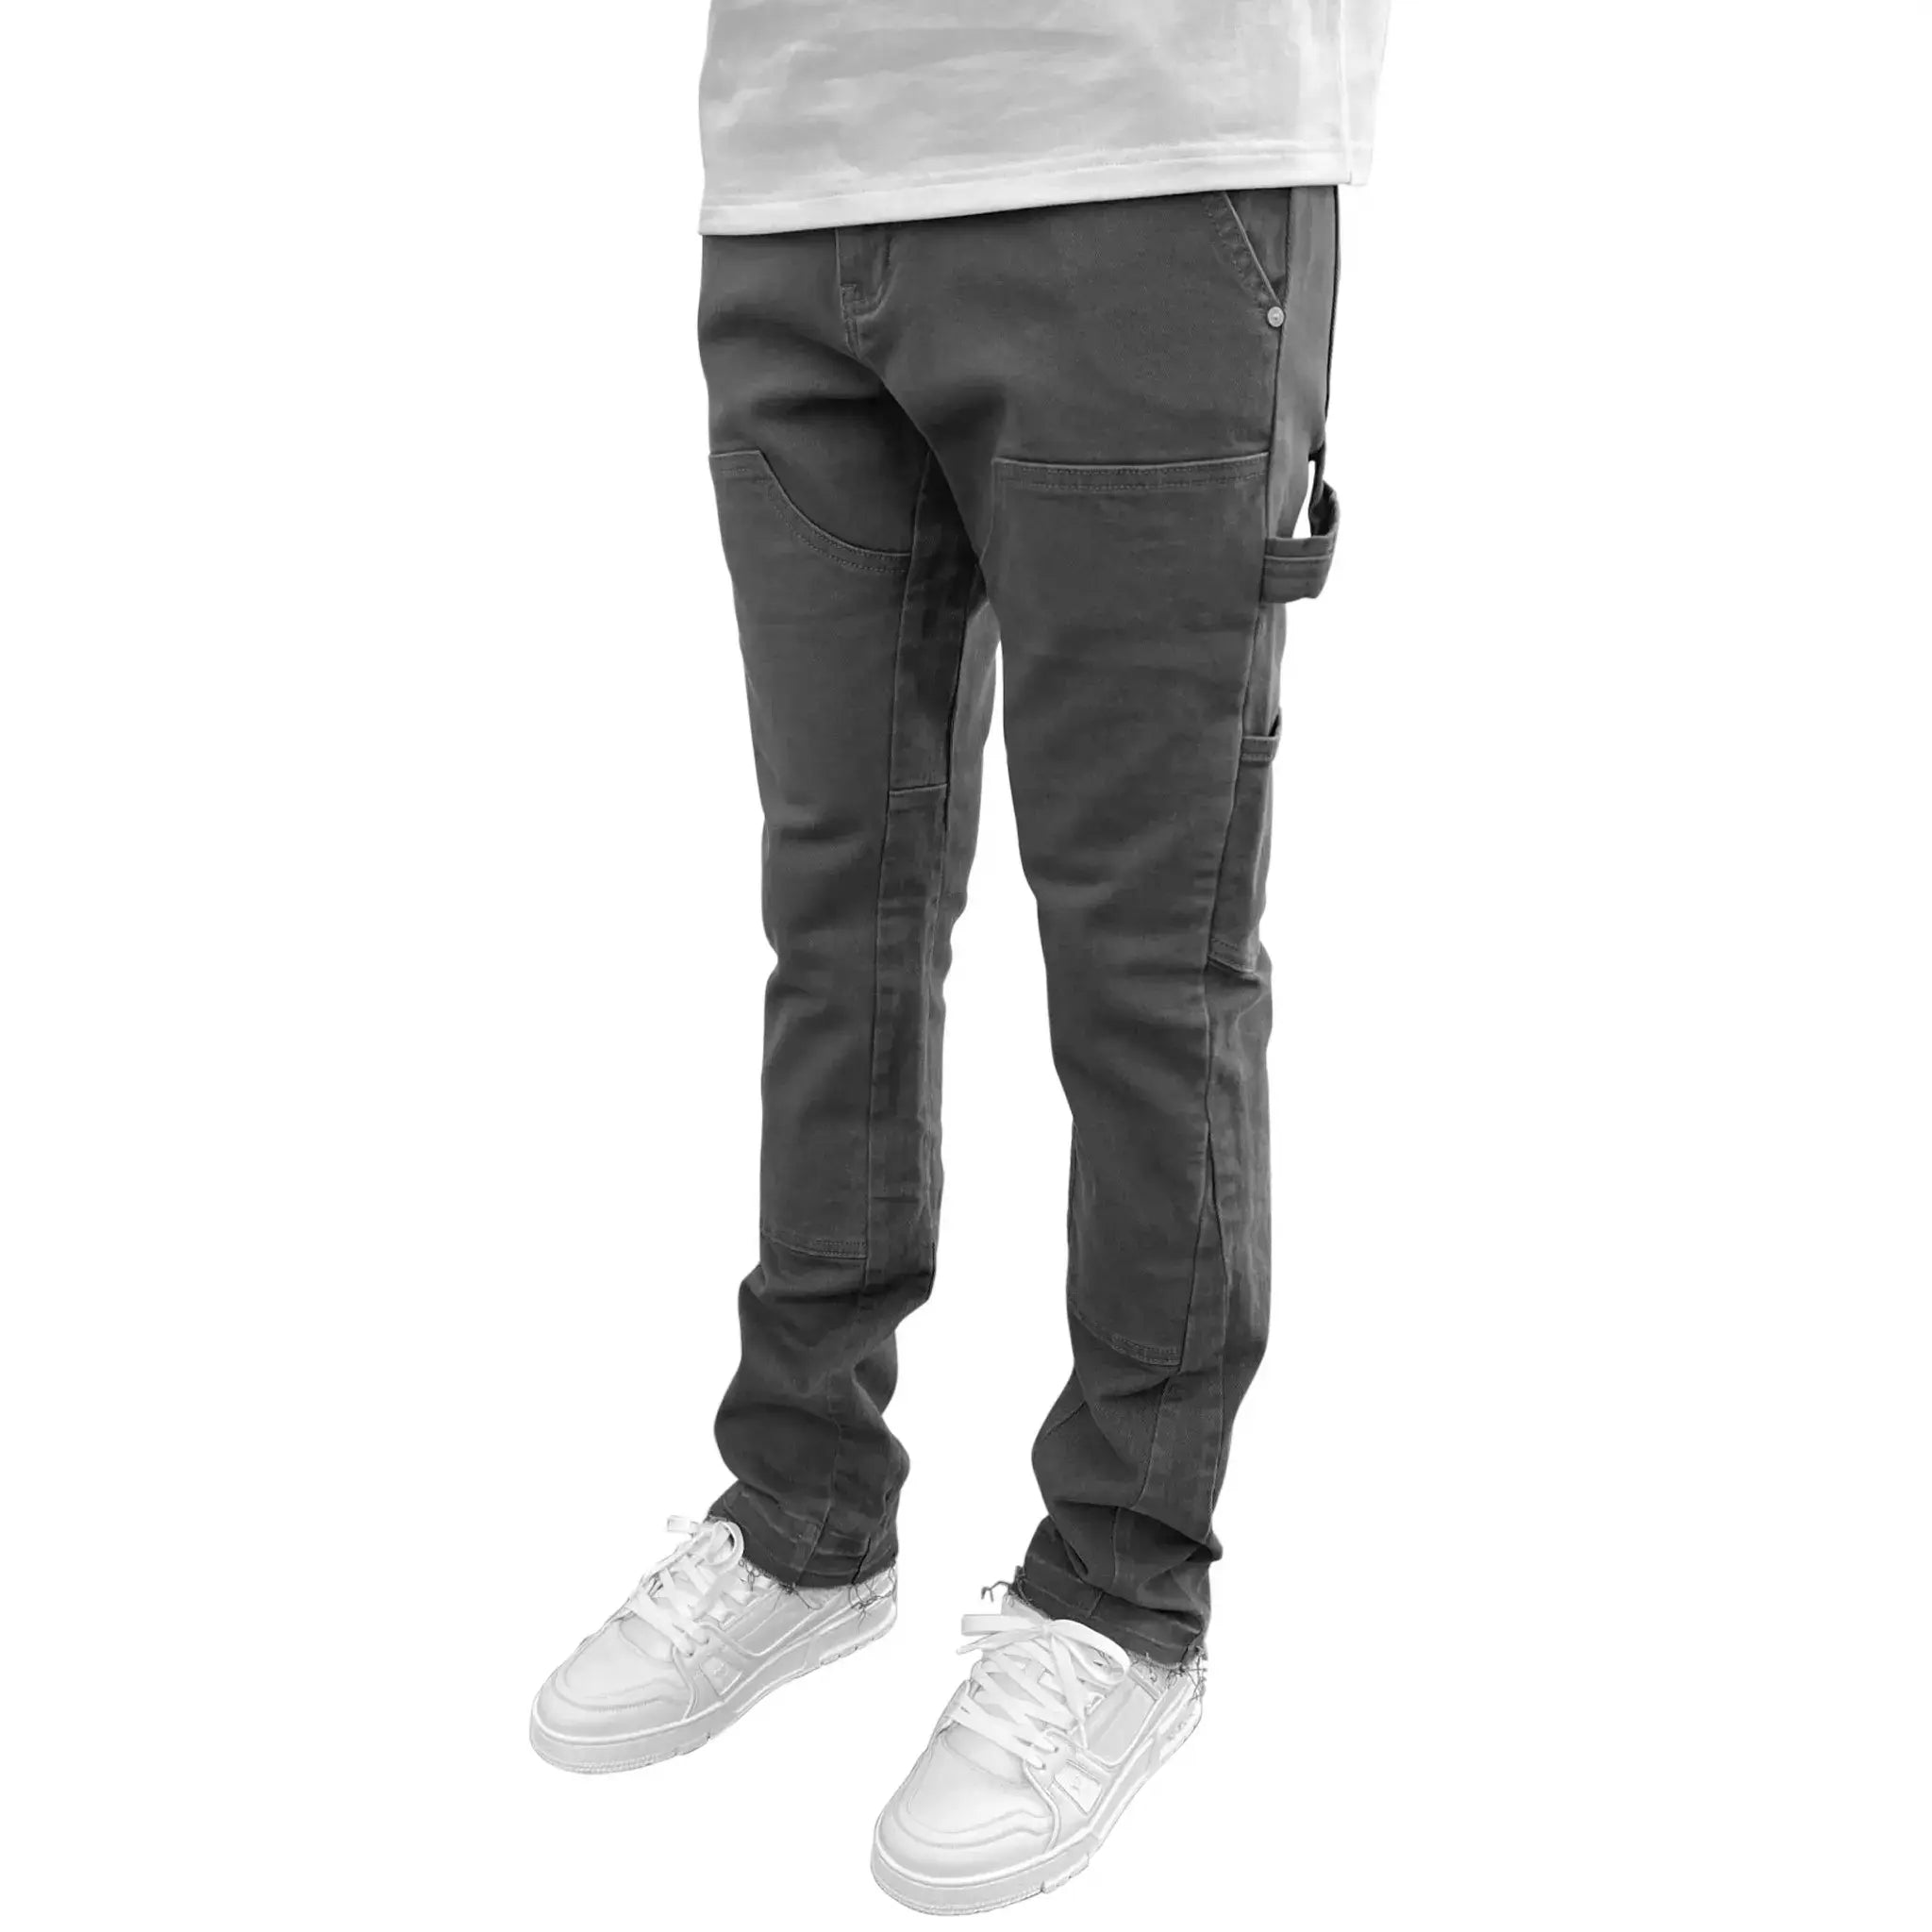 Model Side view of SIARR Rio Jeans Grey